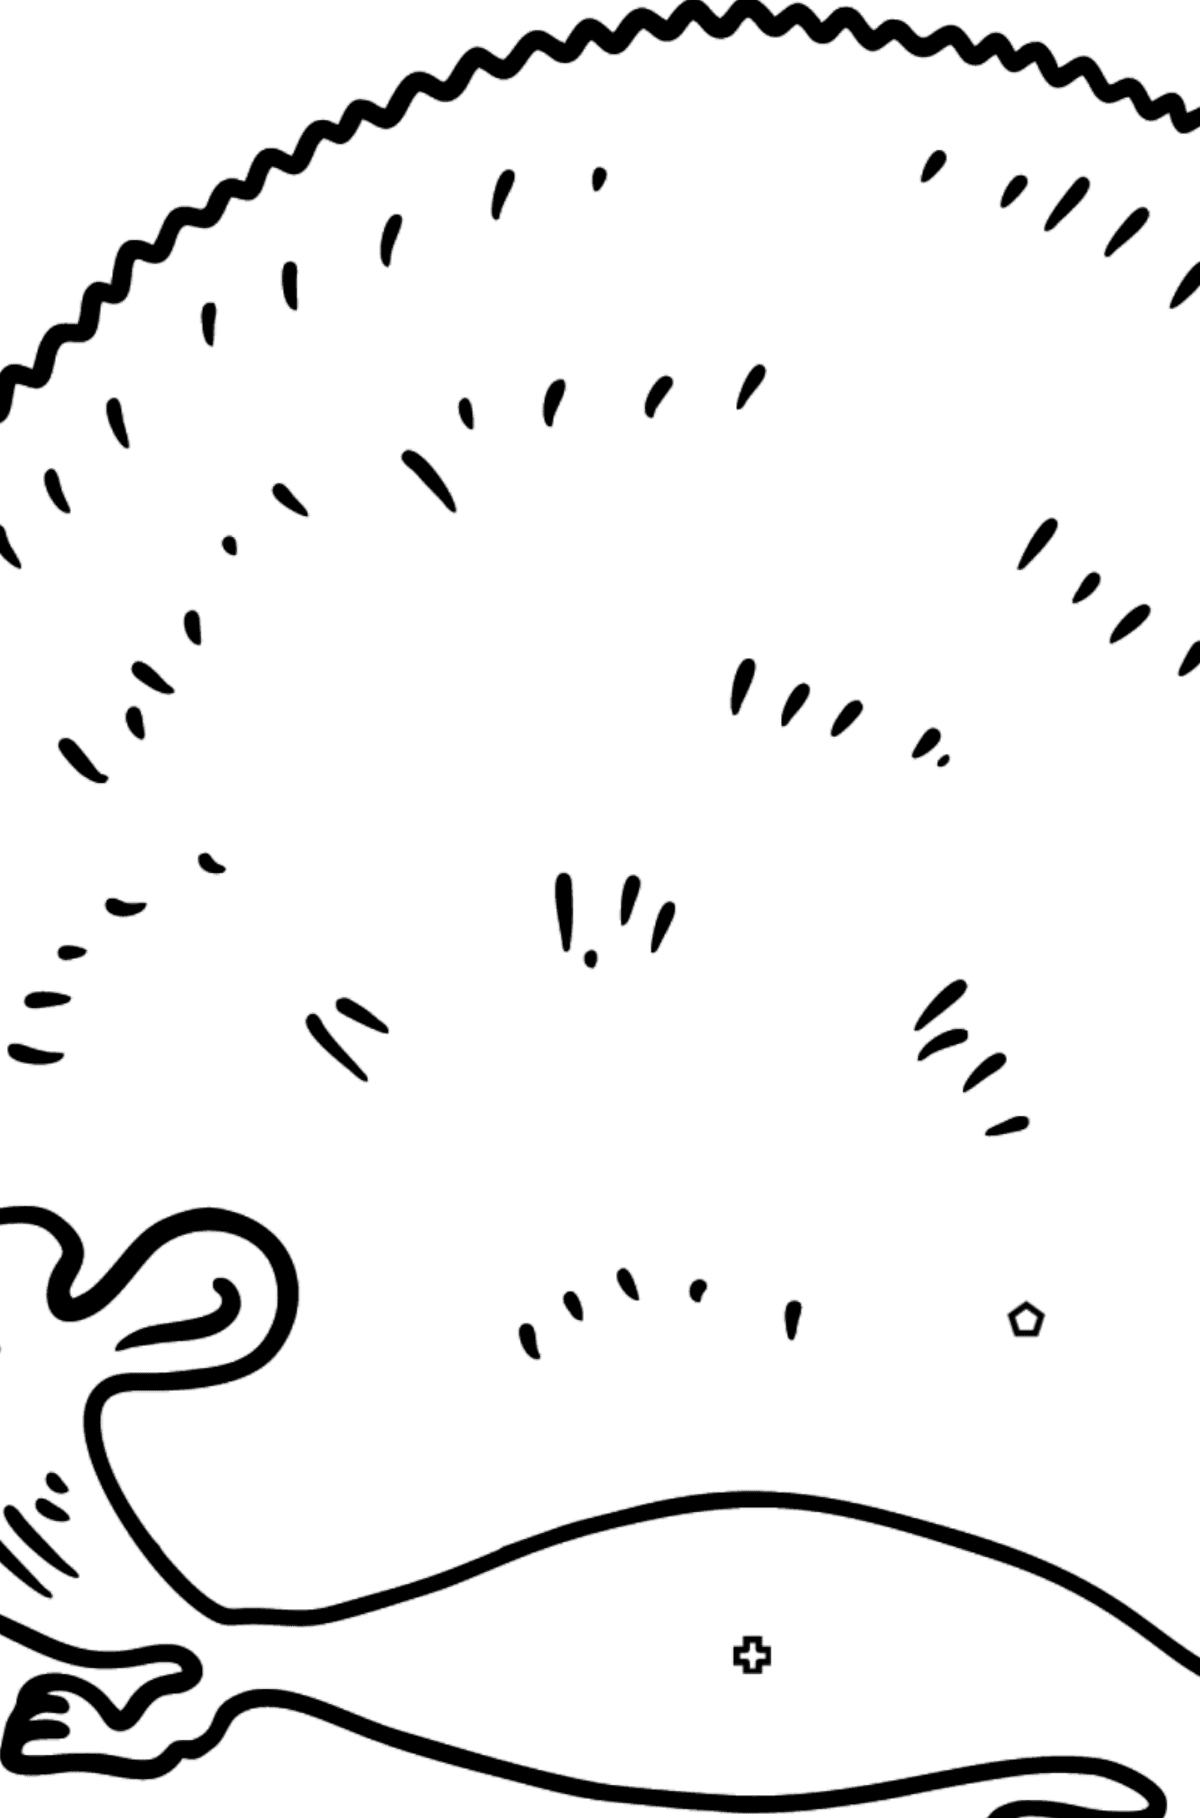 Hedgehog coloring page - Coloring by Geometric Shapes for Kids